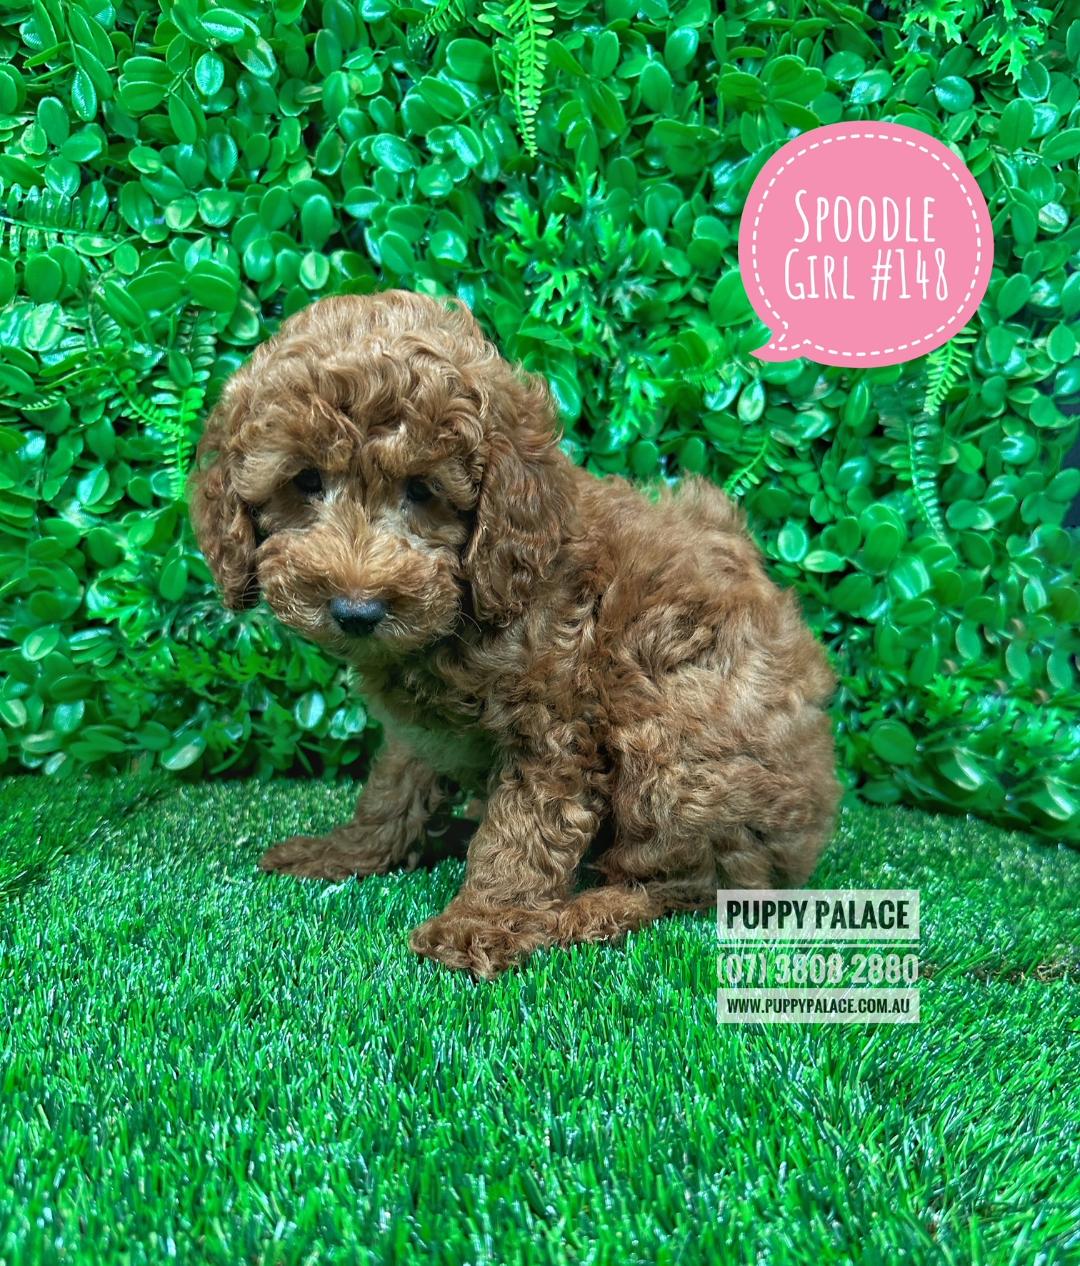 $1895 – Ruby Spoodle / Cockerpoo (Chocolate Spoodle X Red Toy Poodle) – Ruby Girl. My 2nd VACCINATION HAS BEEN DONE. VALUE $100